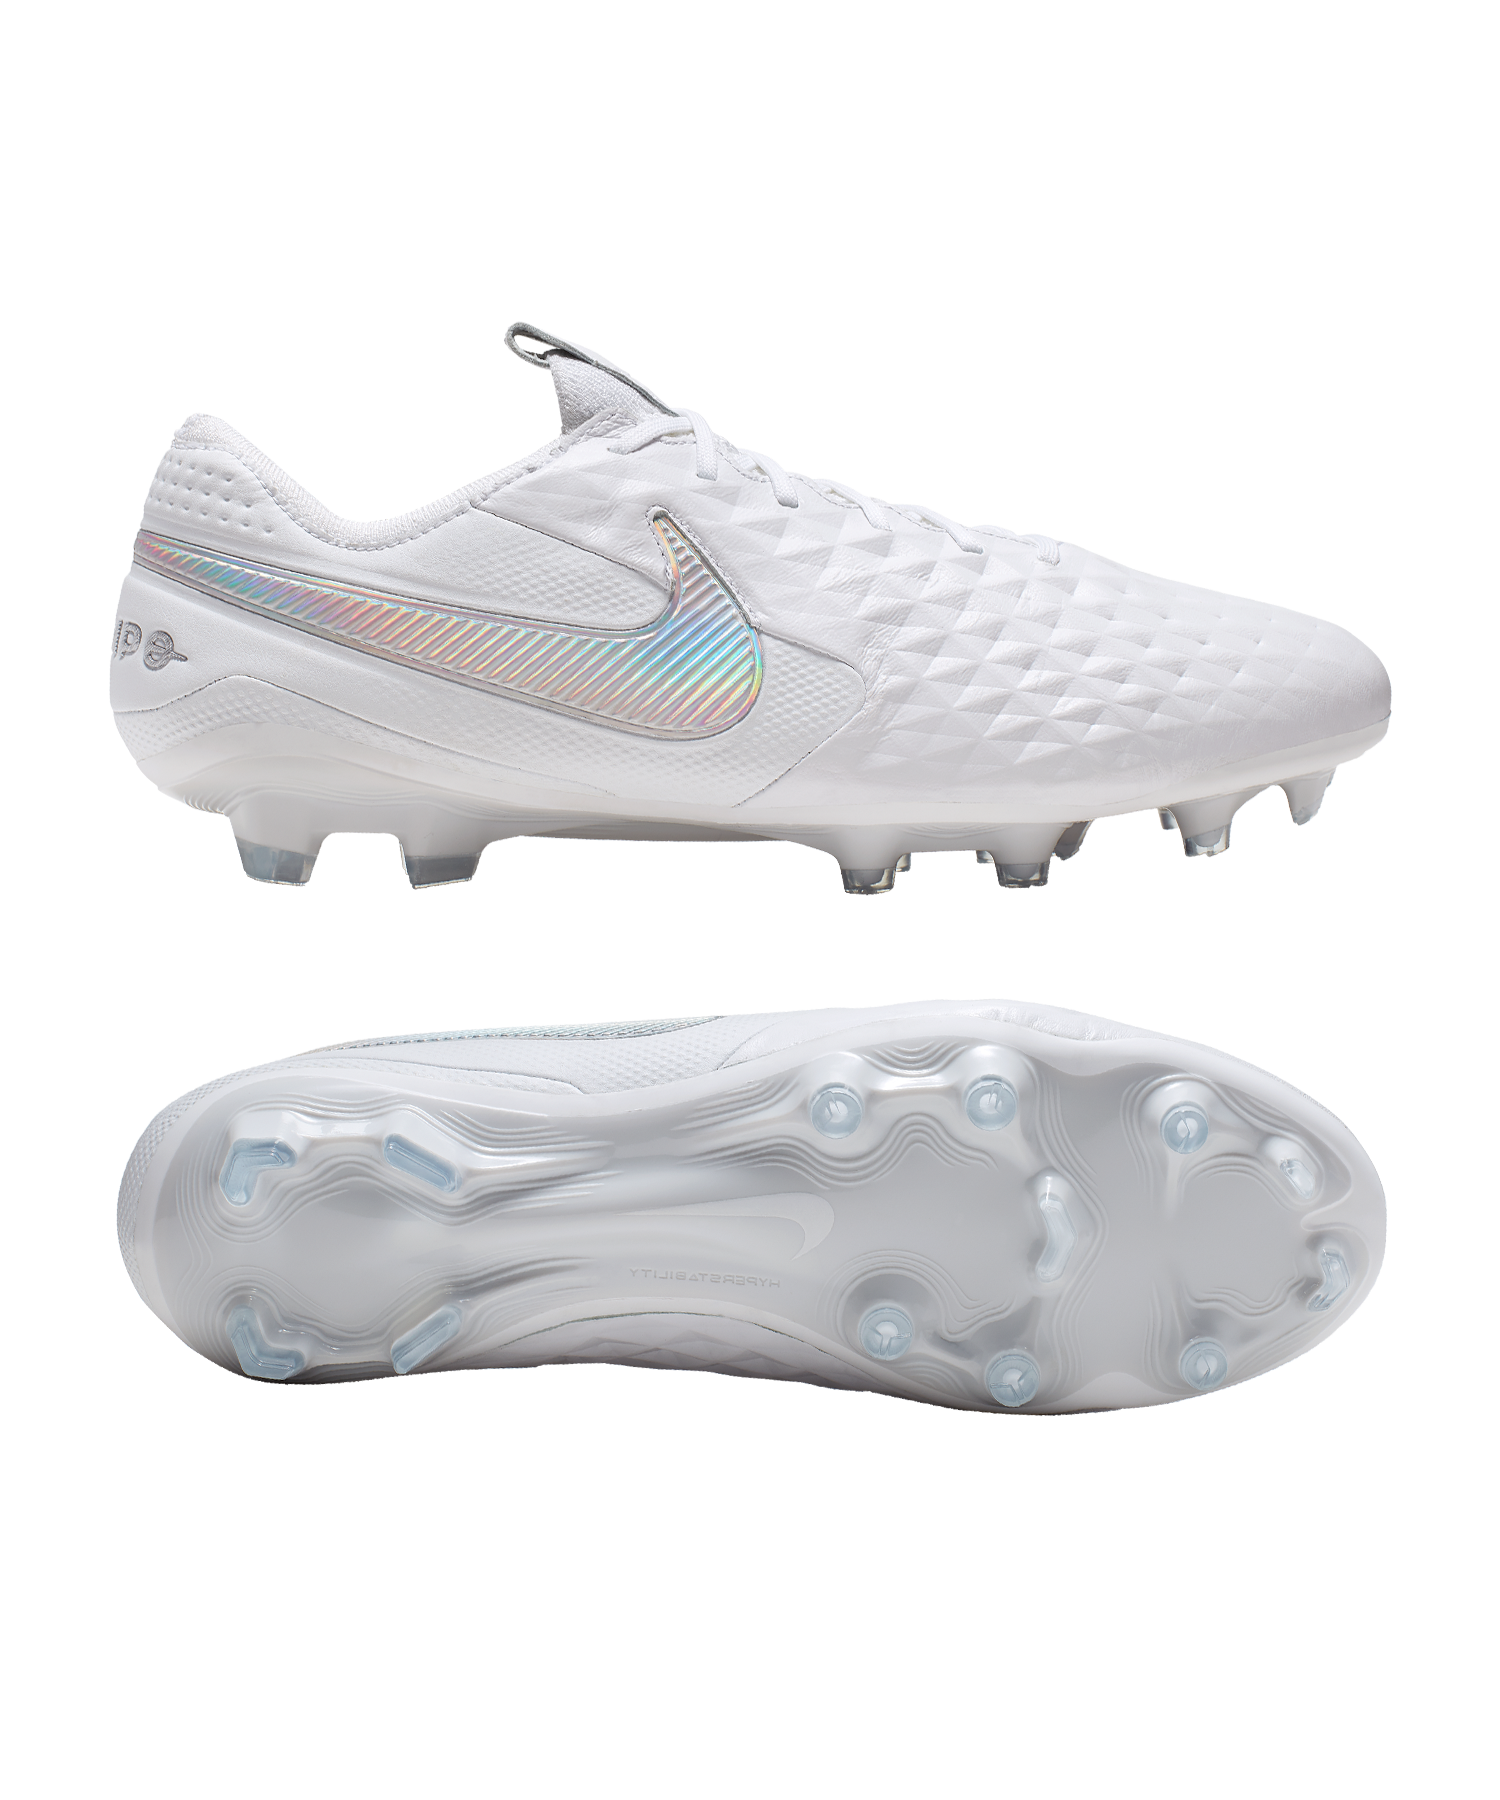 Nike Weather Legend 8 Academy IC? Future Lab The soccer.